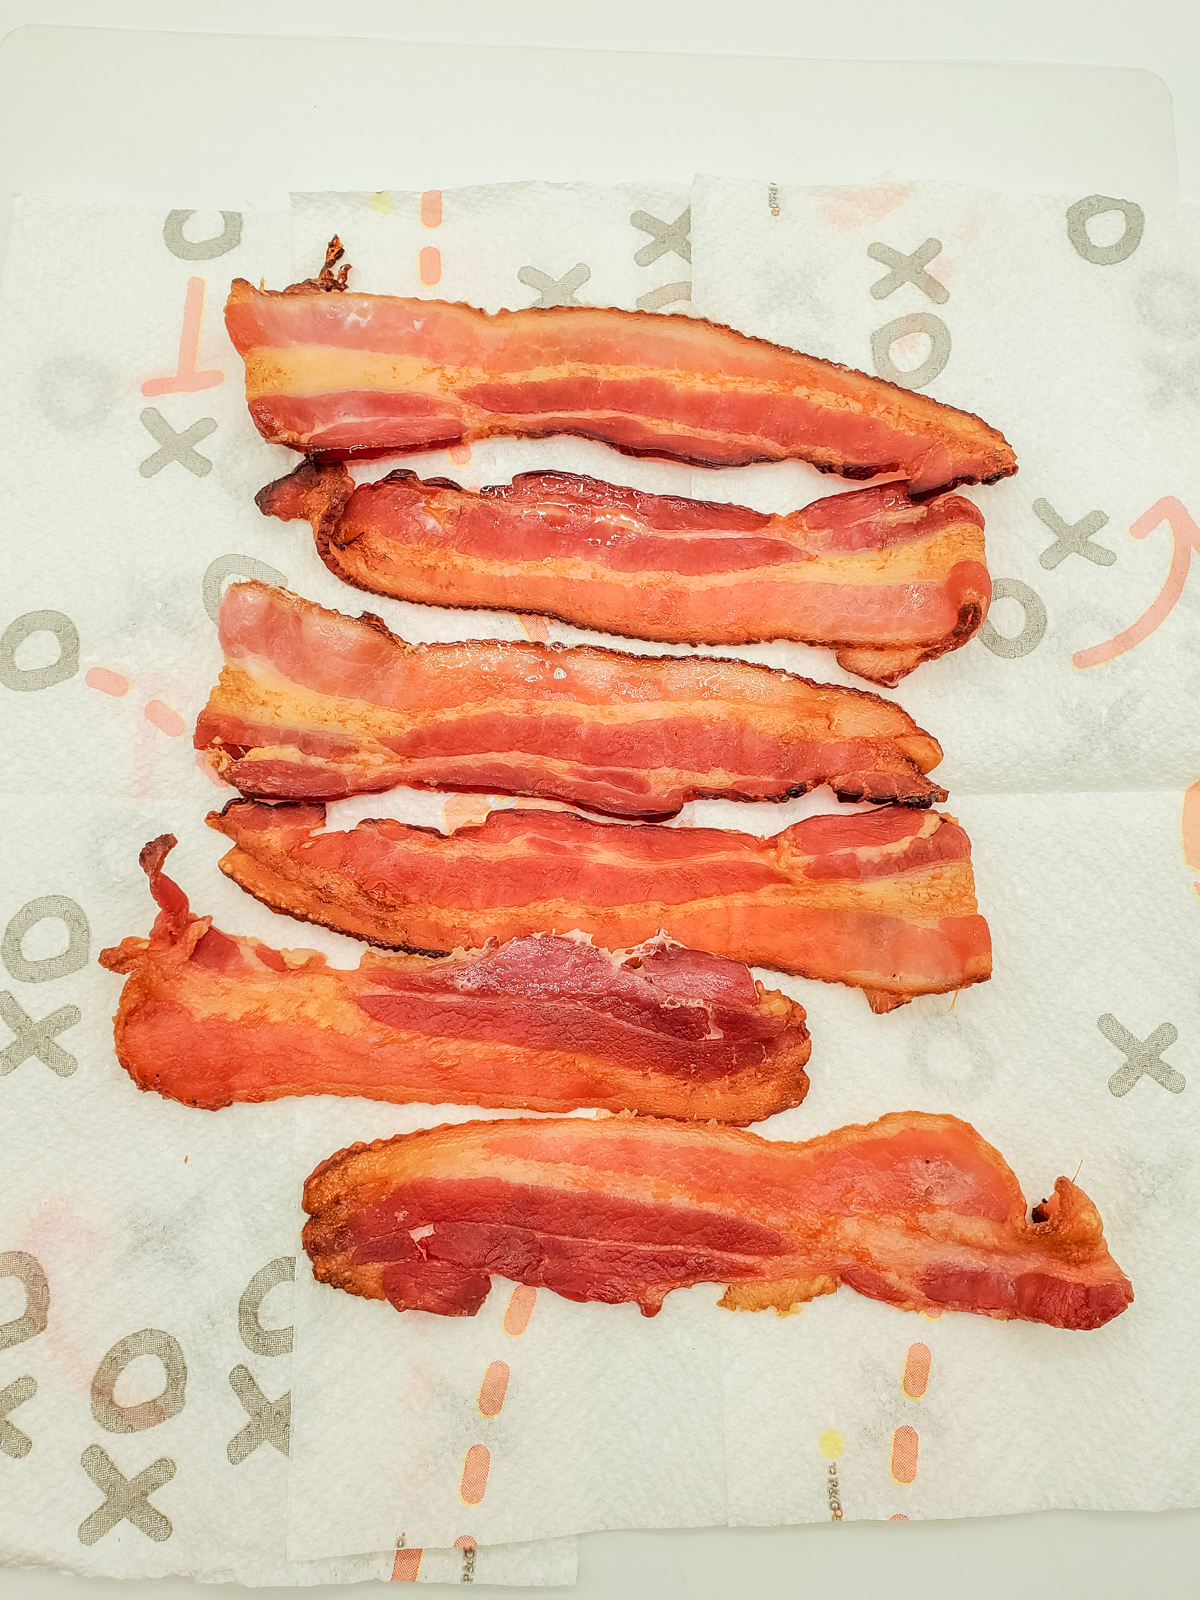 to freeze place cooked strips of bacon on paper towels